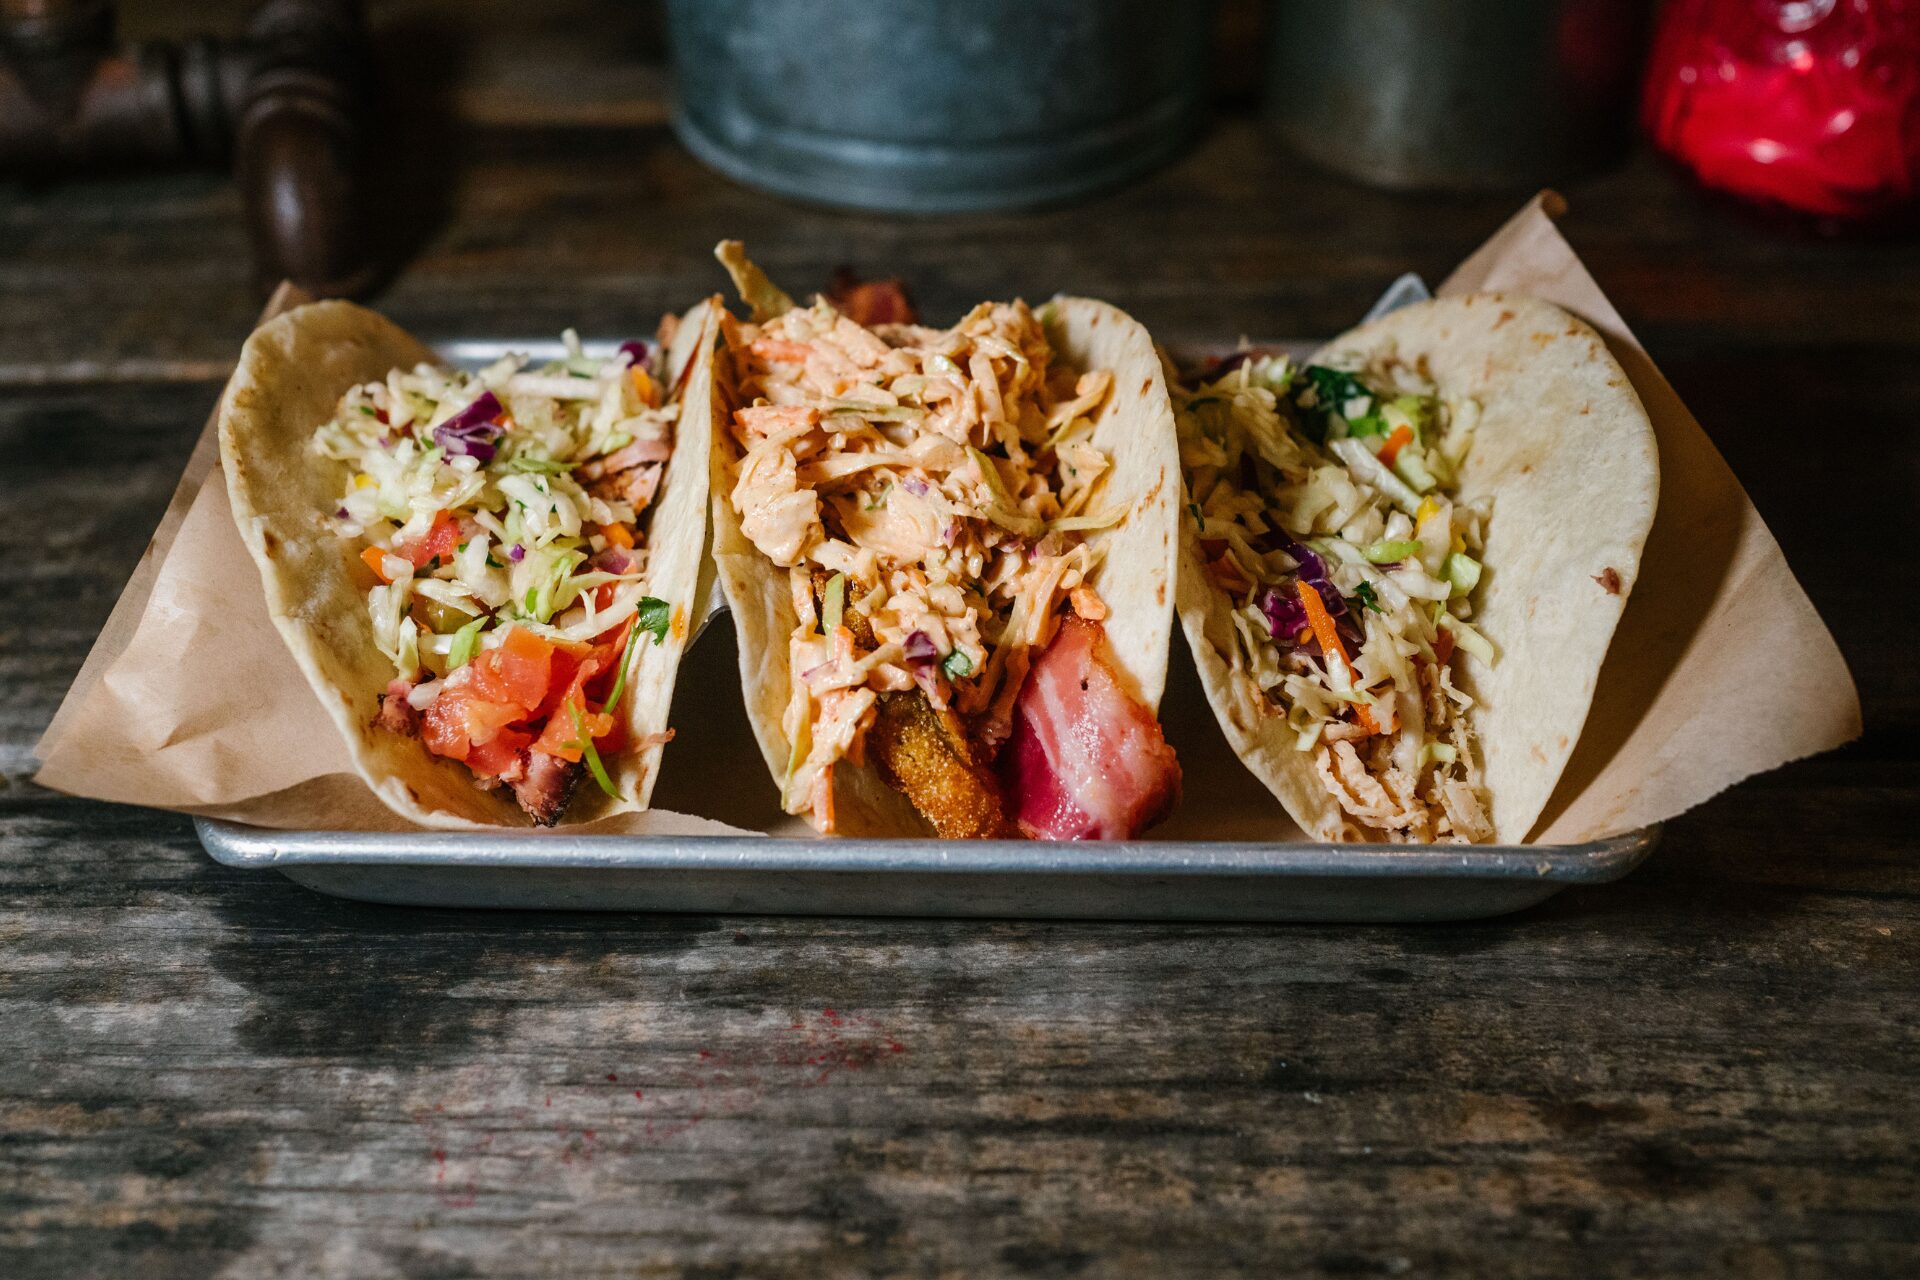 Tacos from The Pig & Pint in Jackson, Mississippi.